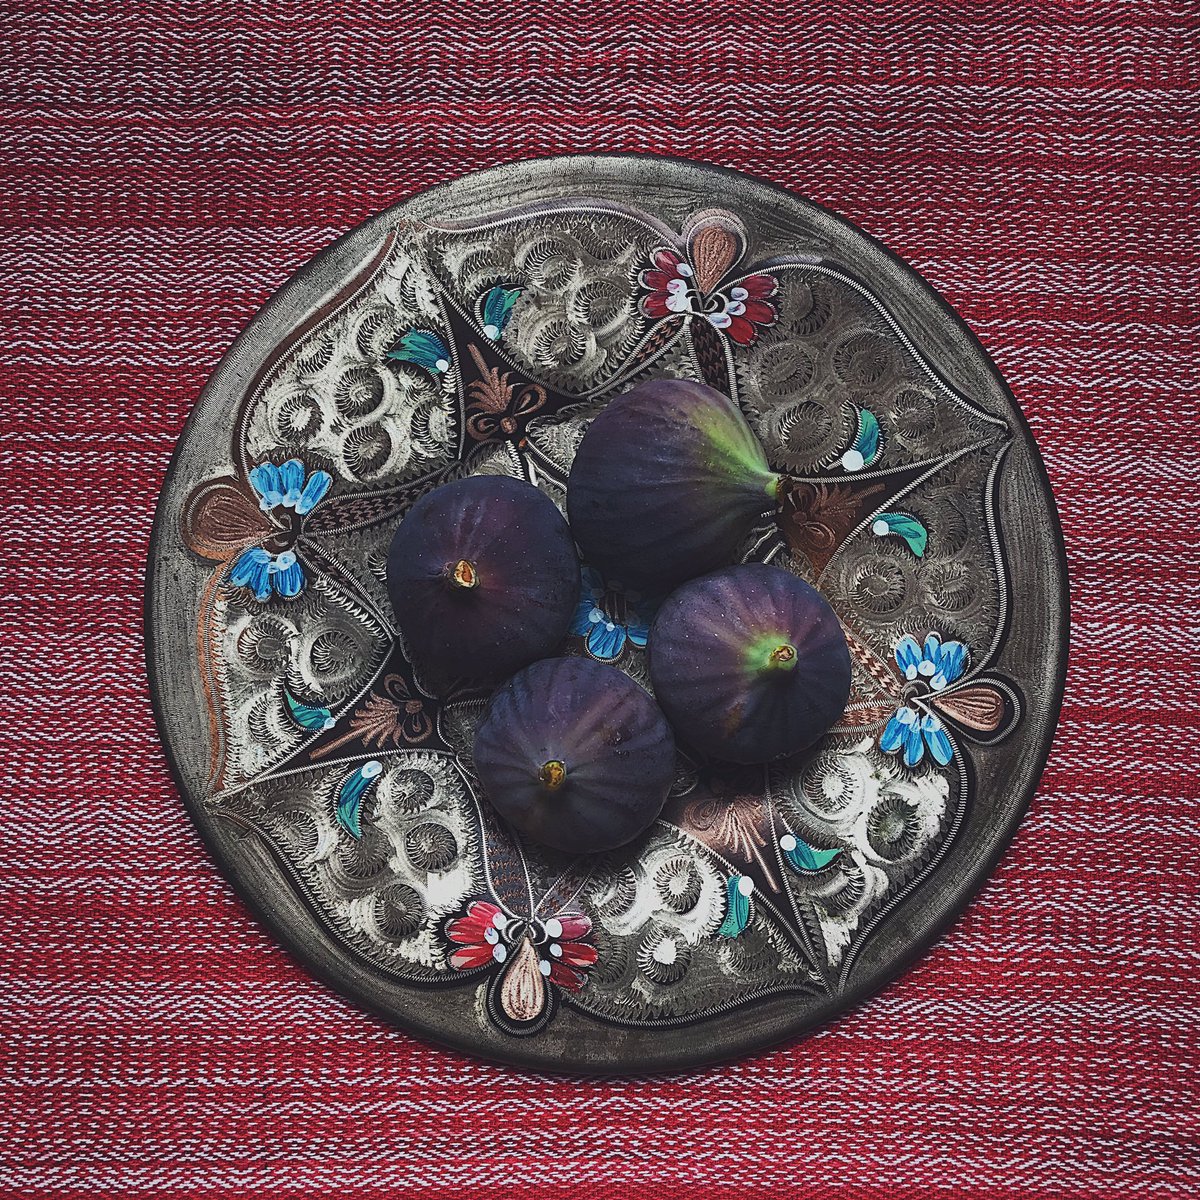 ‘One of these figs is not like the others’ #figs #Turkey #vintageplate #copper #enamel #vsco